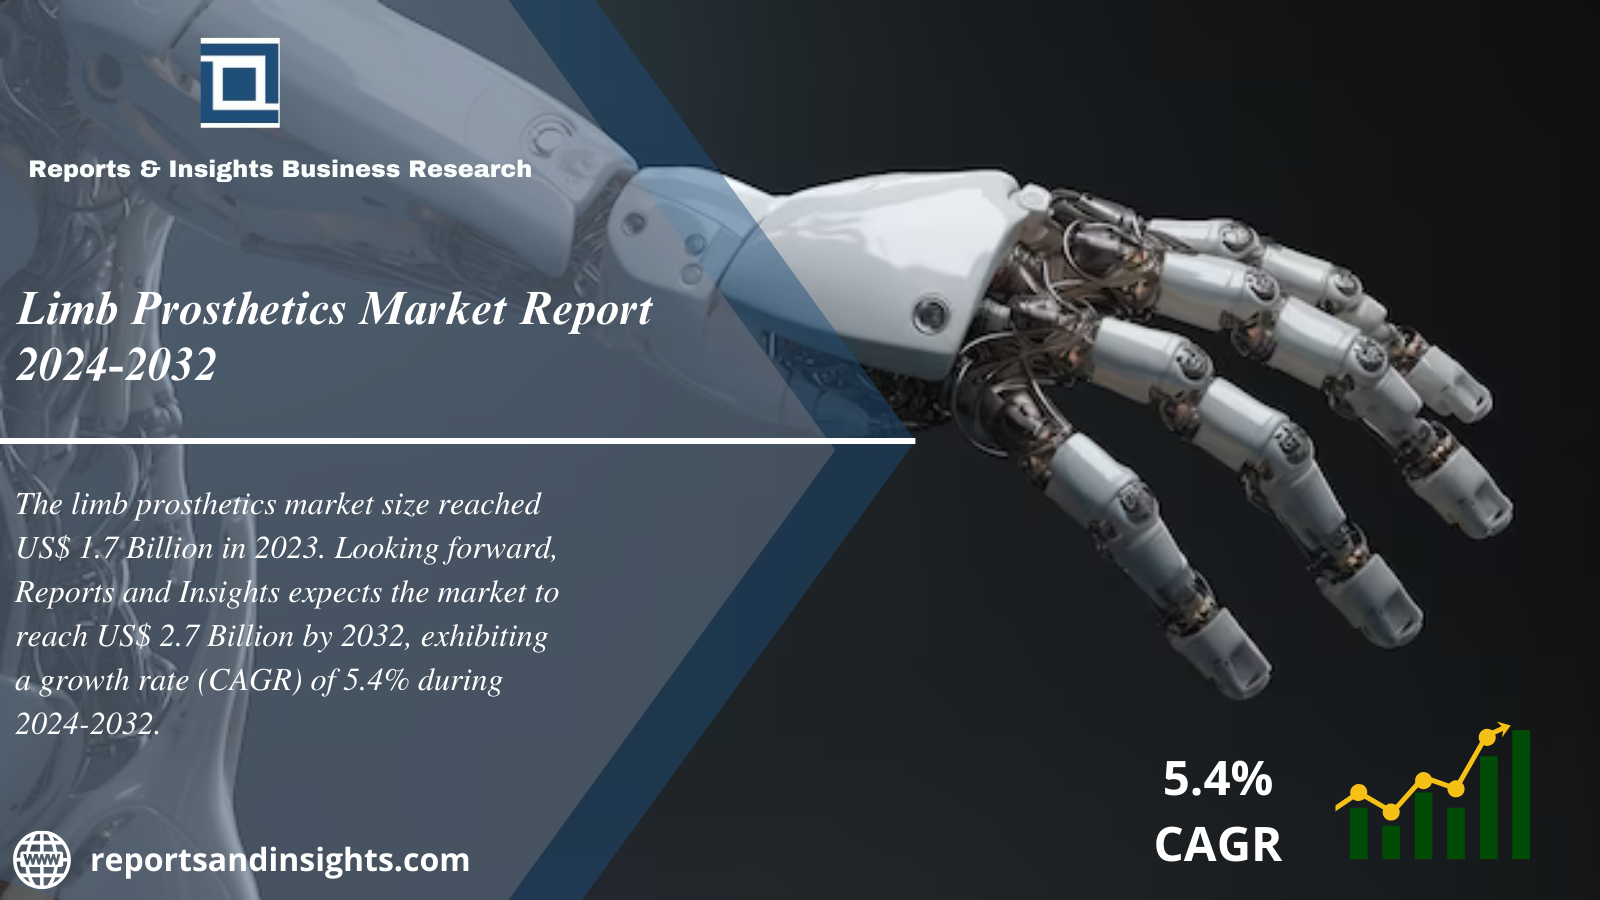 Limb Prosthetics Market Report 2024 to 2032: Industry Share, Trends, Size, Share, Growth, Demand and Forecast